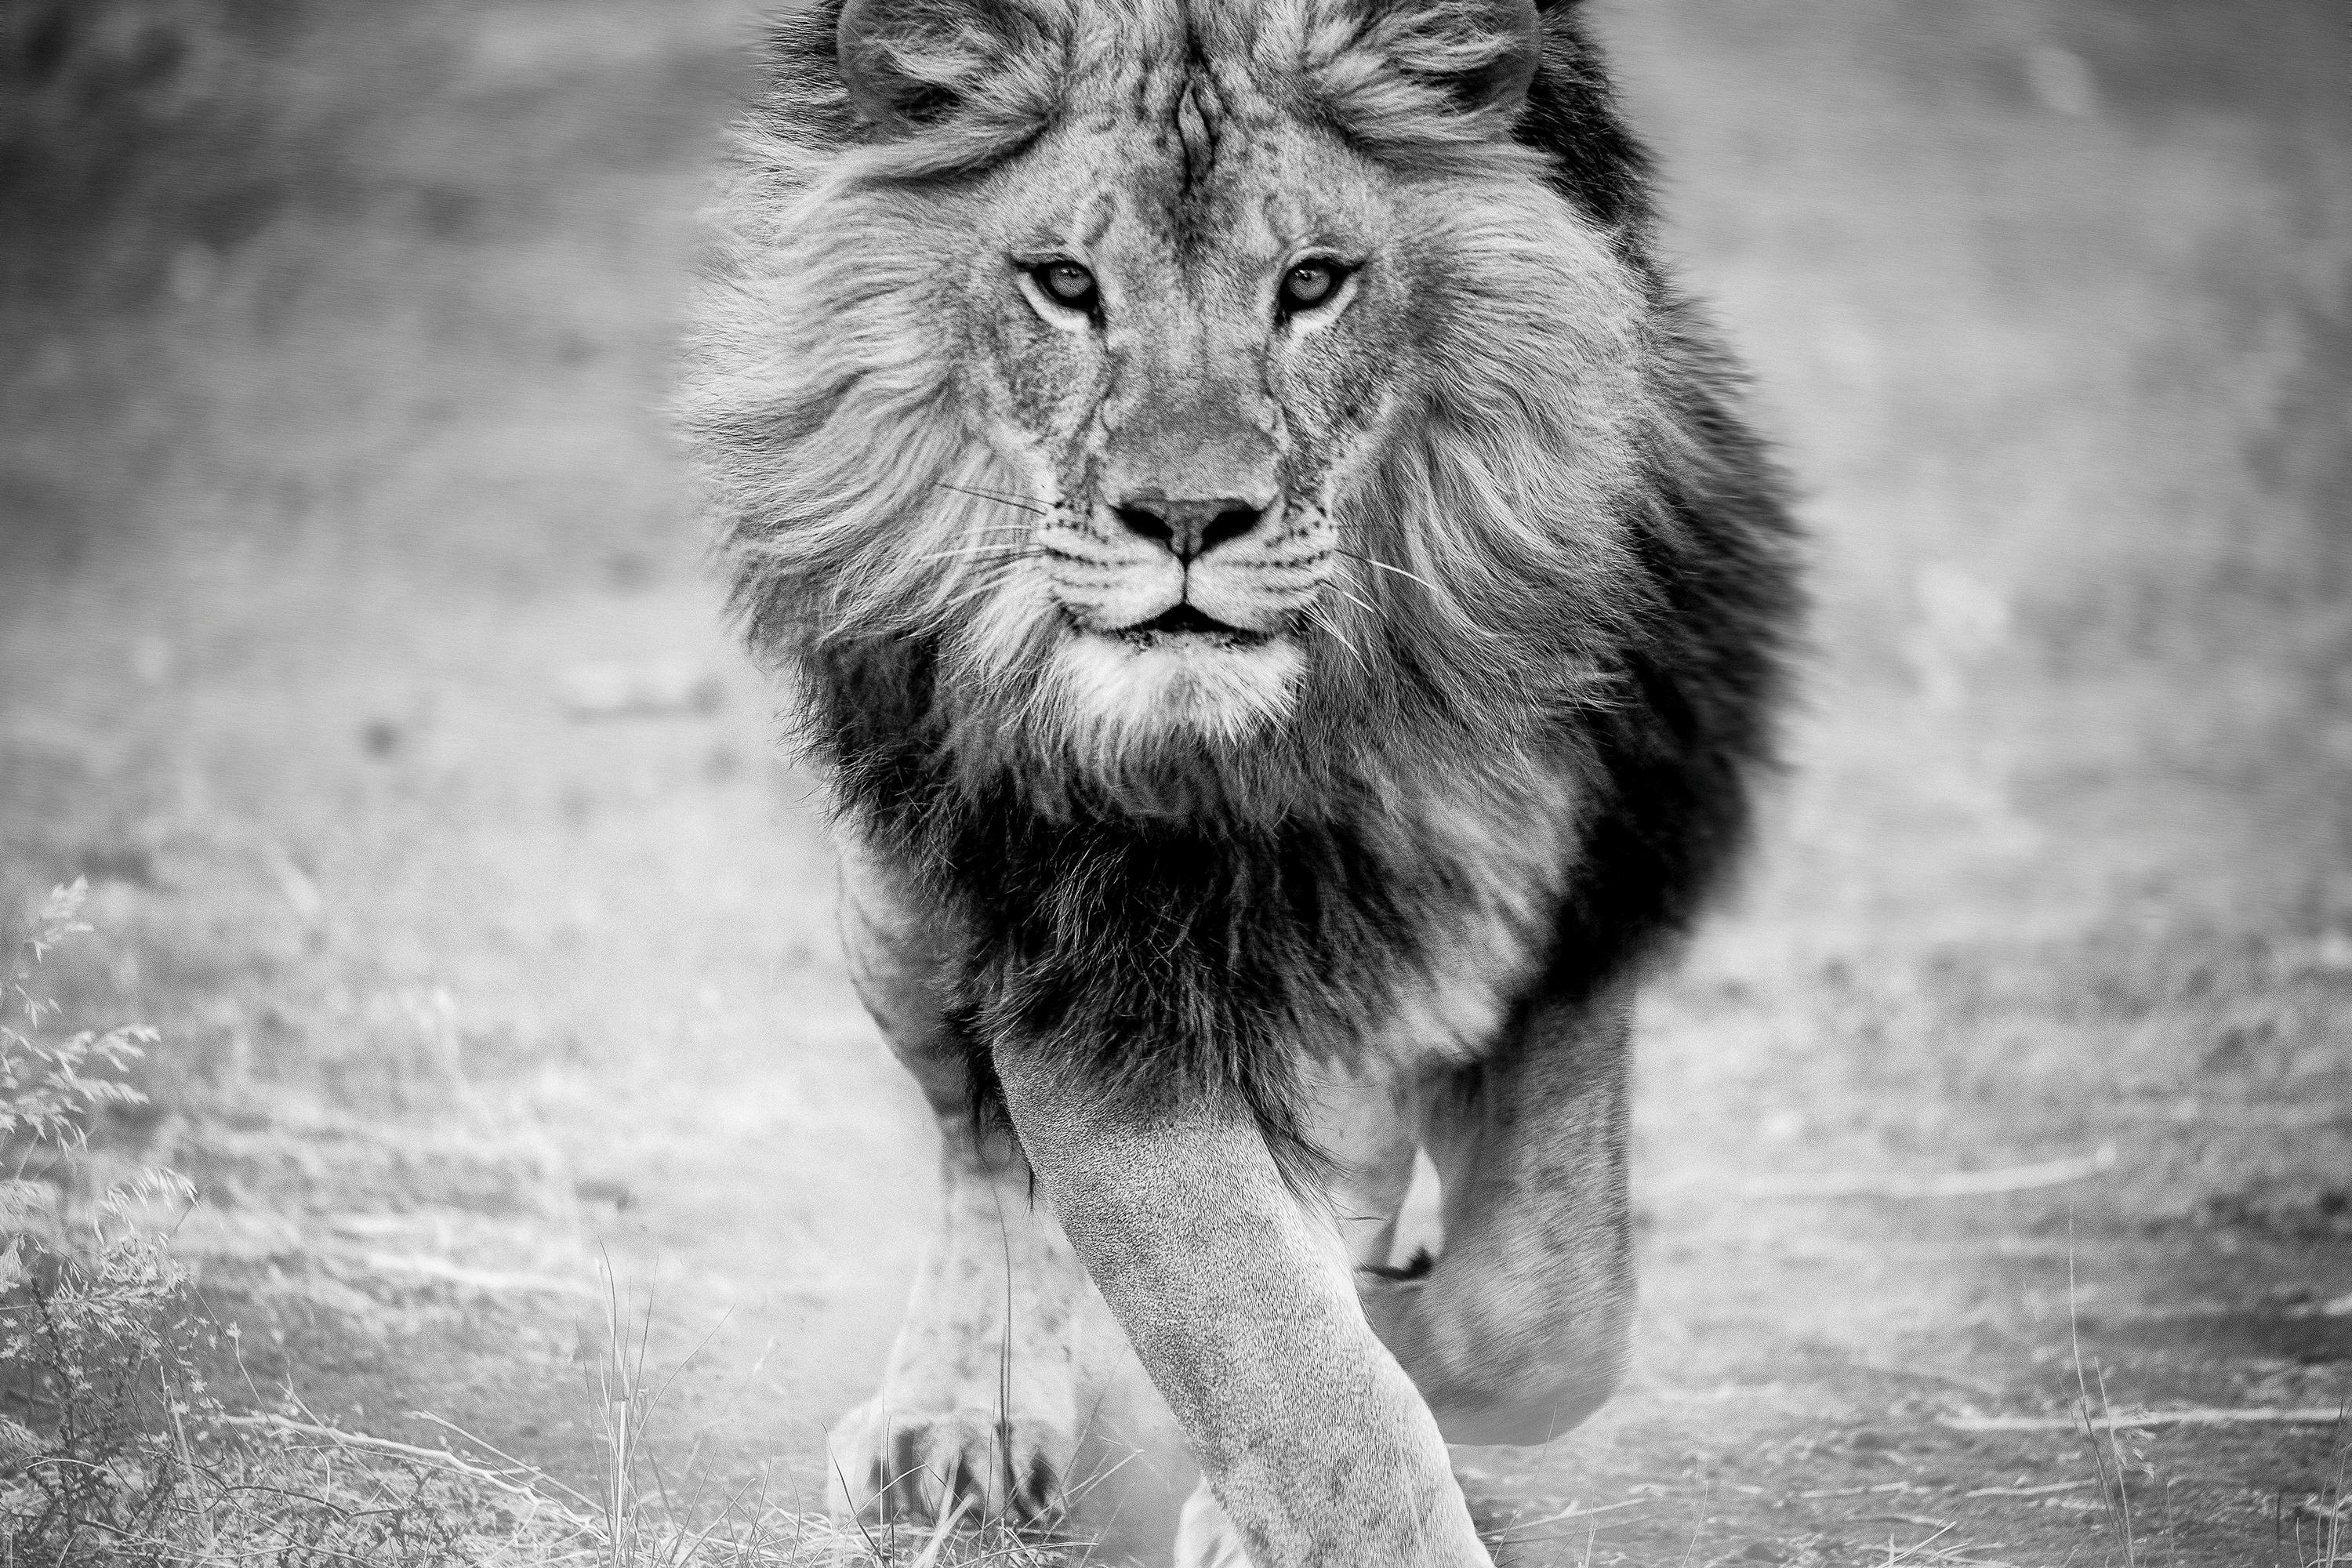 Shane Russeck Black and White Photograph - Lion Photography "Panthera Leo" 28x40 - Black & White Photograph, Signed Print